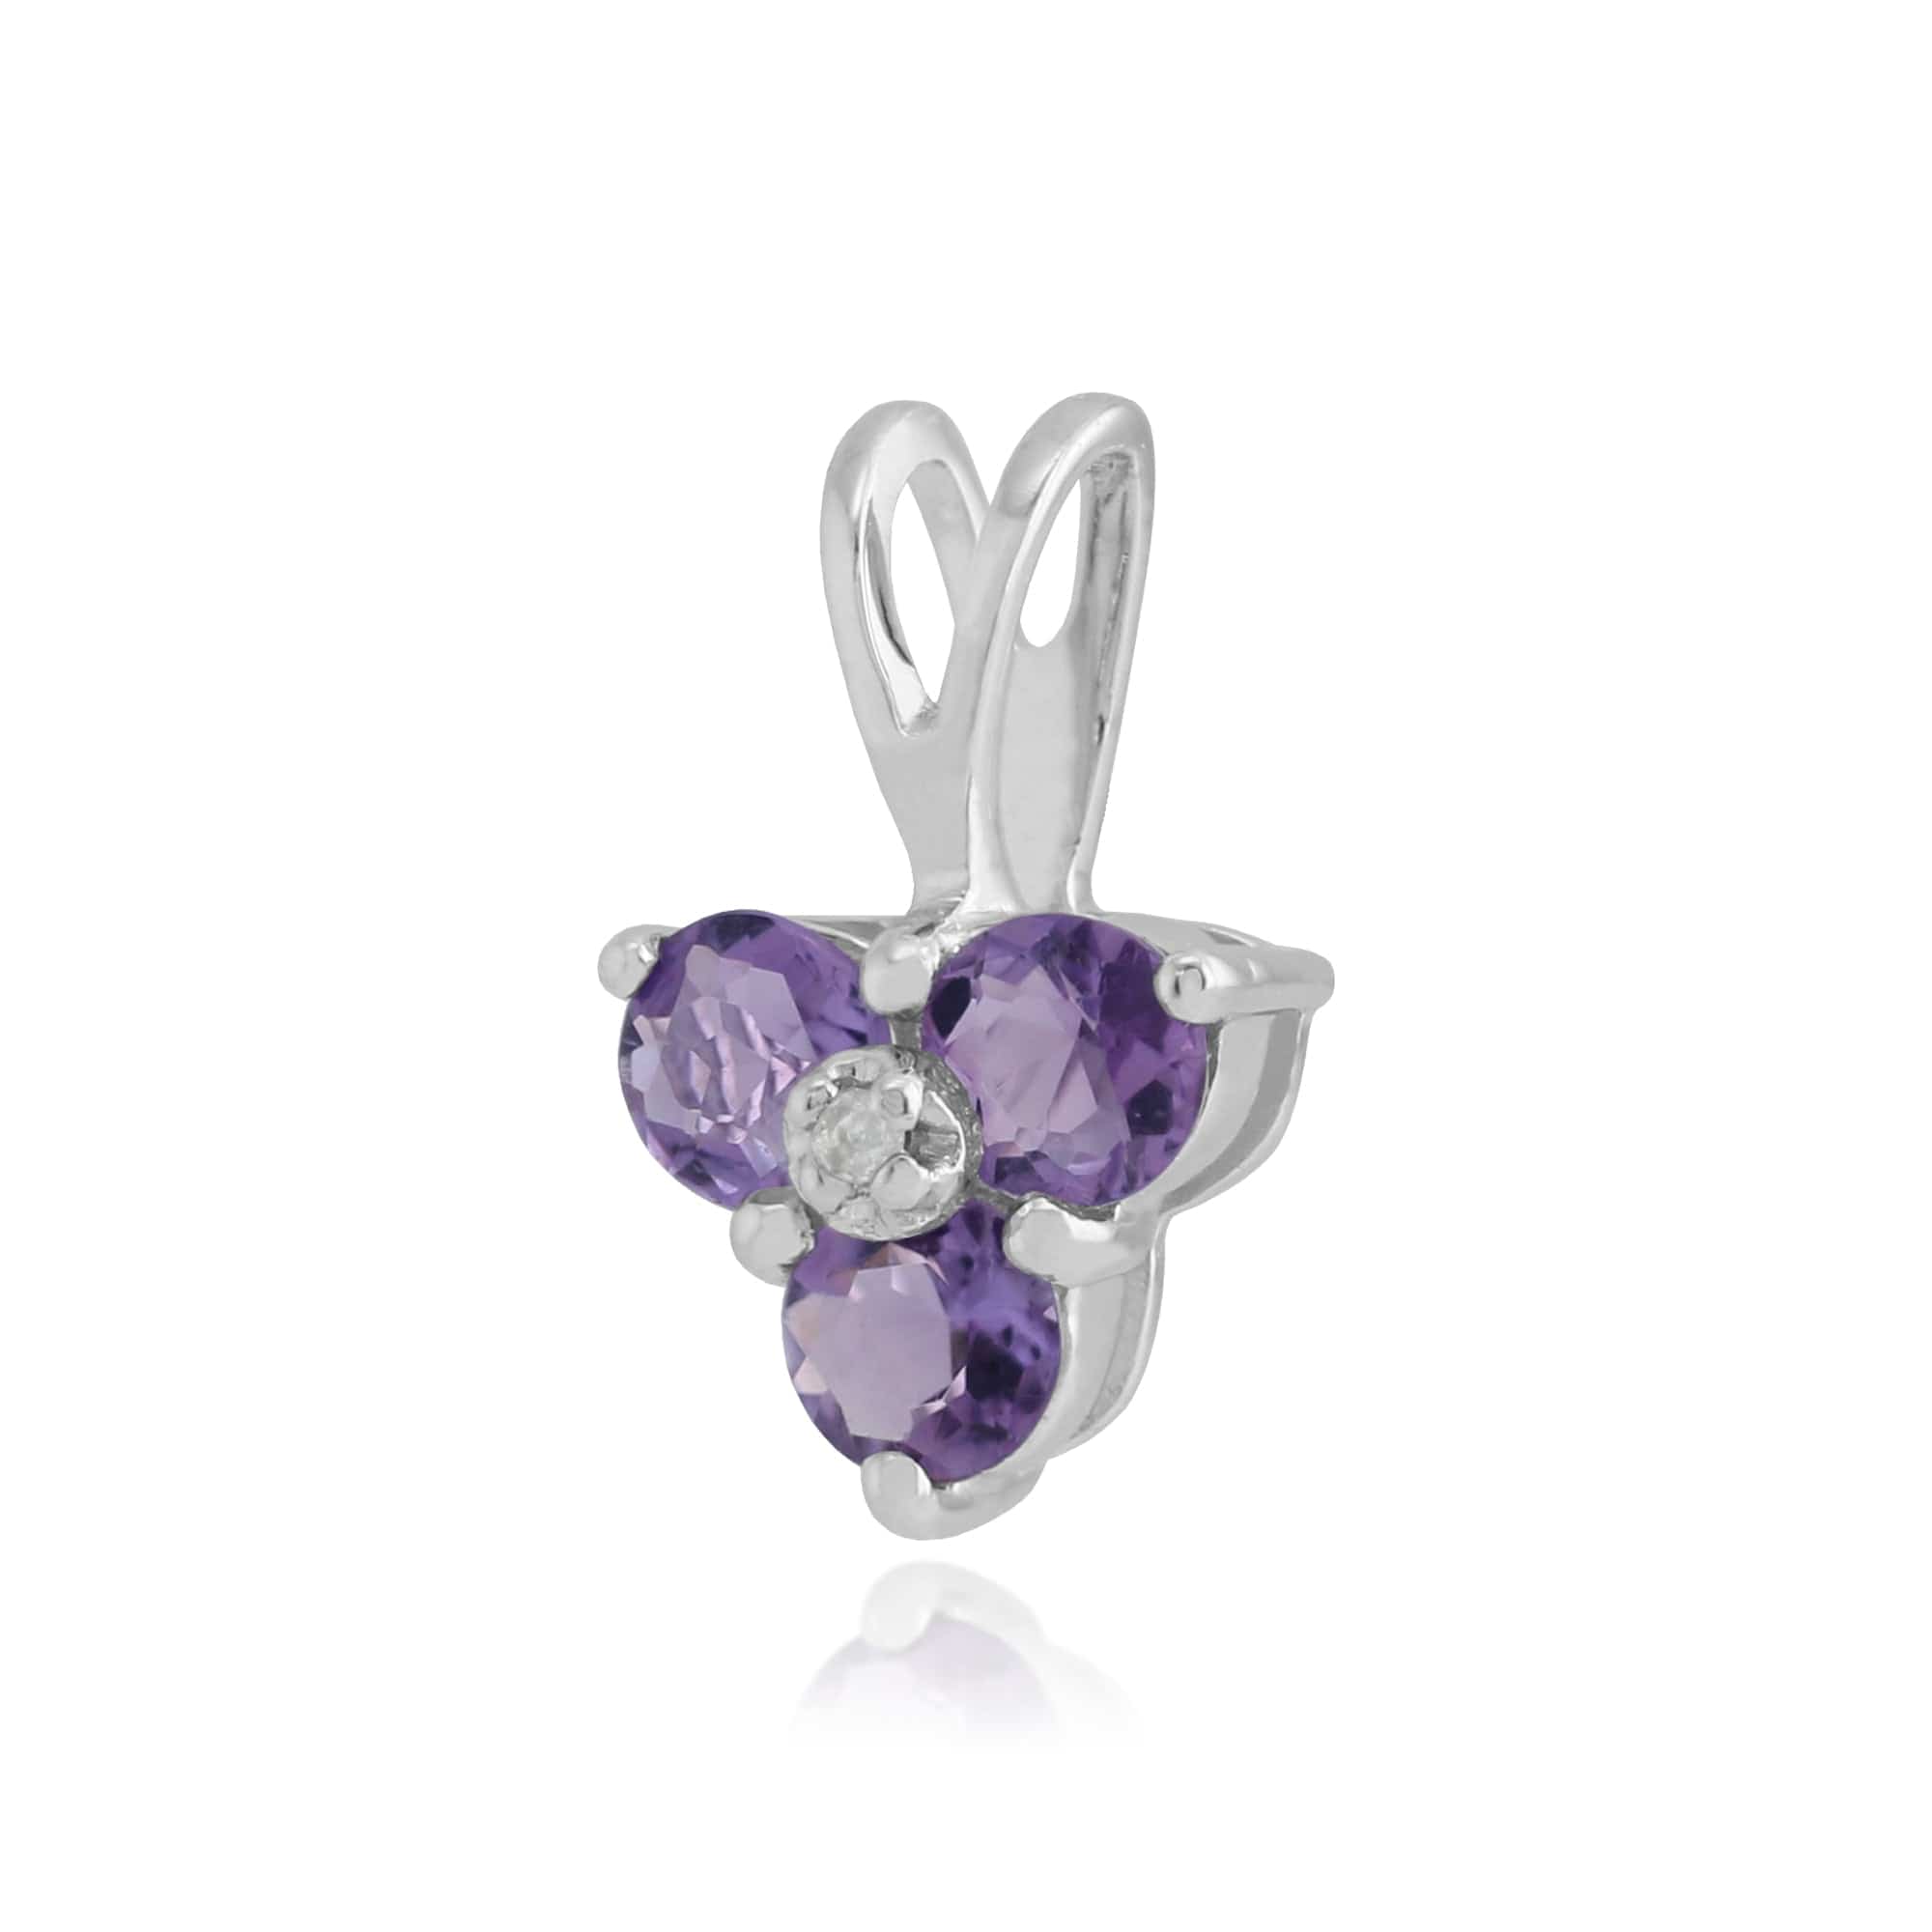 10877 Floral Amethyst & Diamond Pendant in 9ct White Gold 2